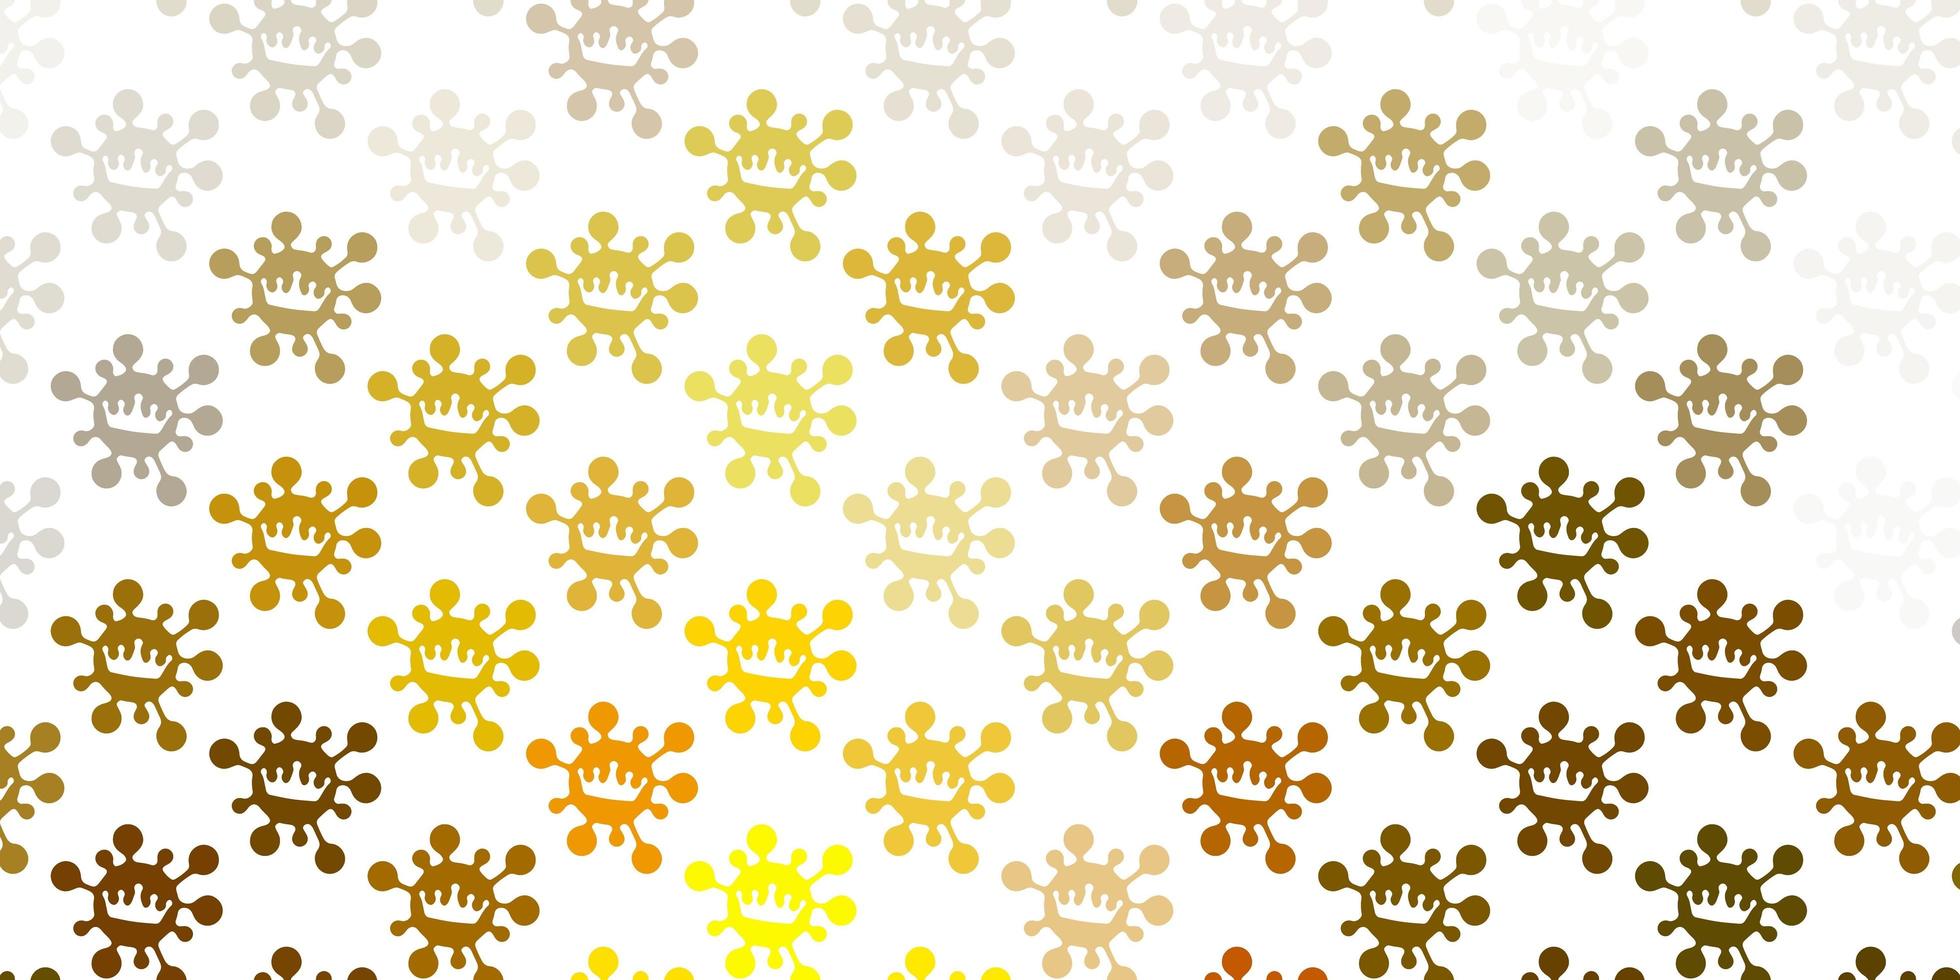 Light green, yellow vector background with covid-19 symbols.